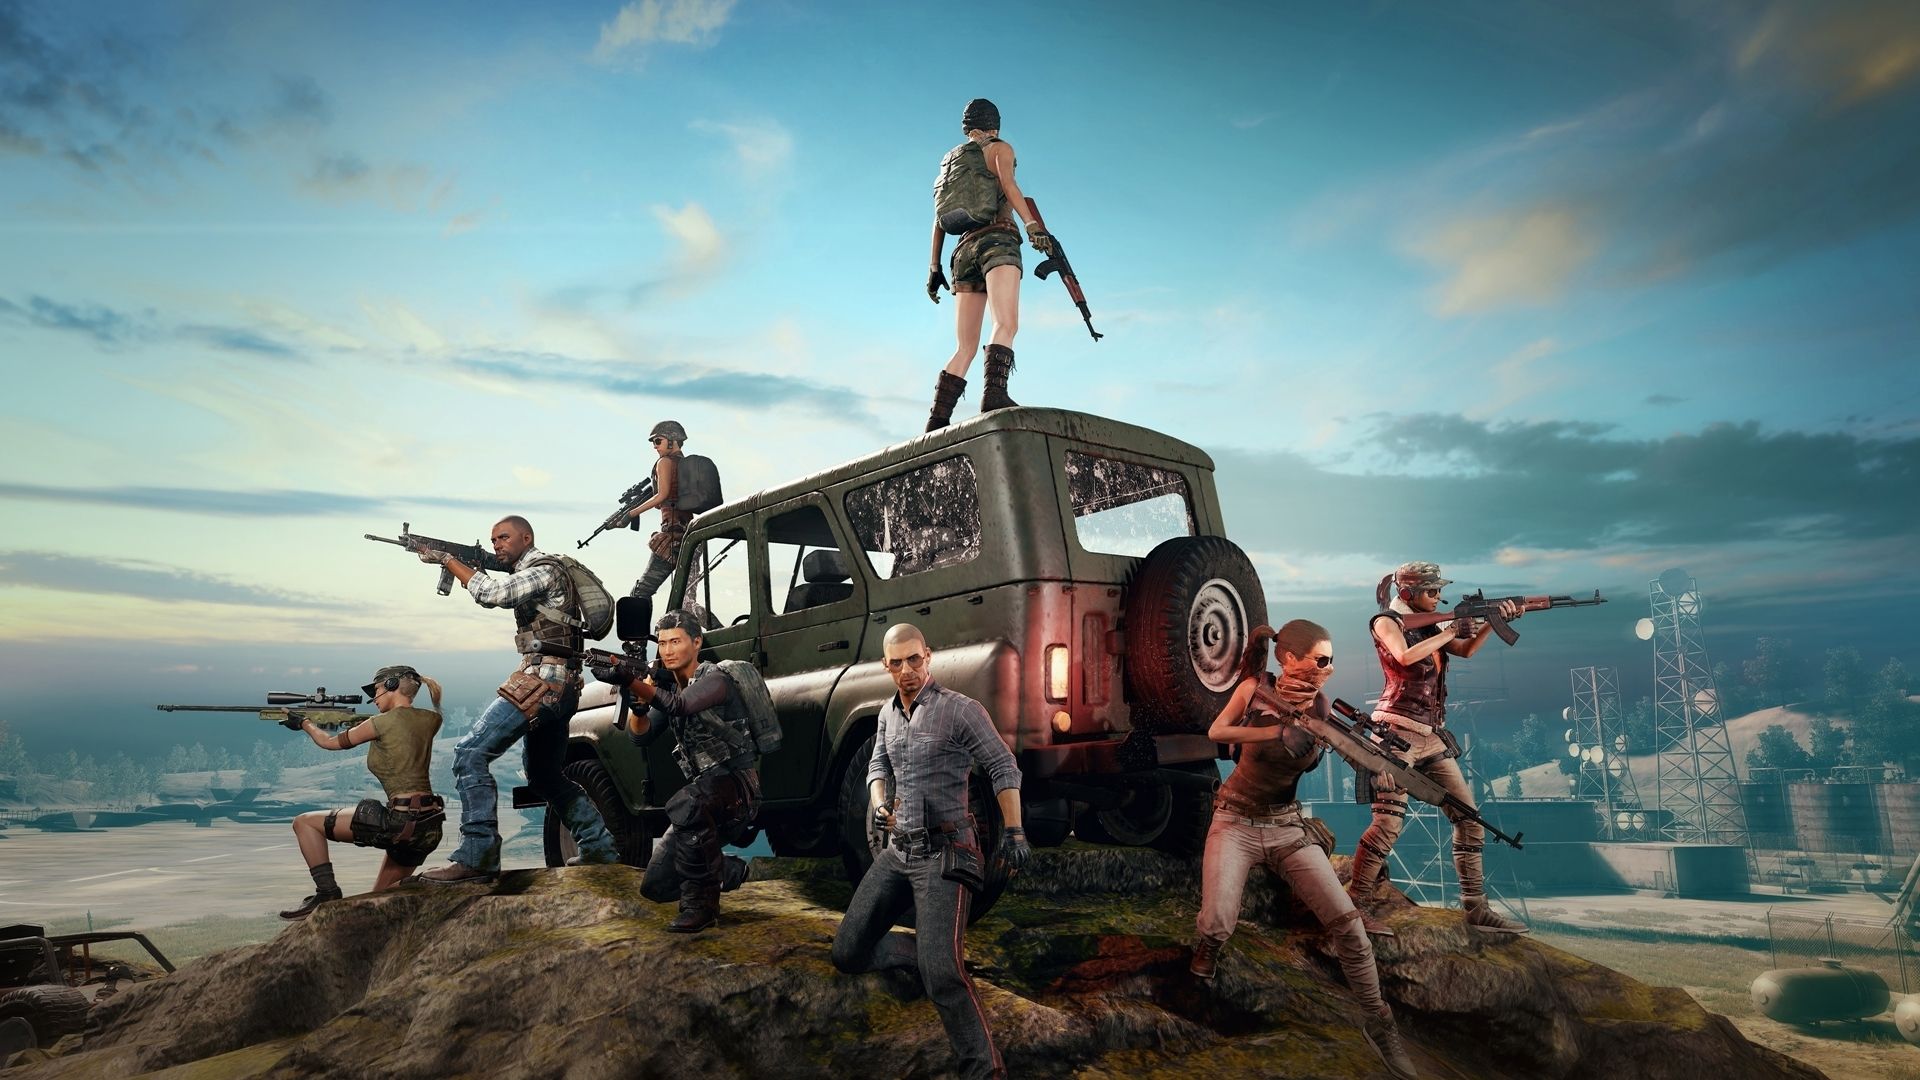 PUBG Mobile Reveals Collaboration with Bruce Lee to Bring Exclusive In-game Challenges and Items